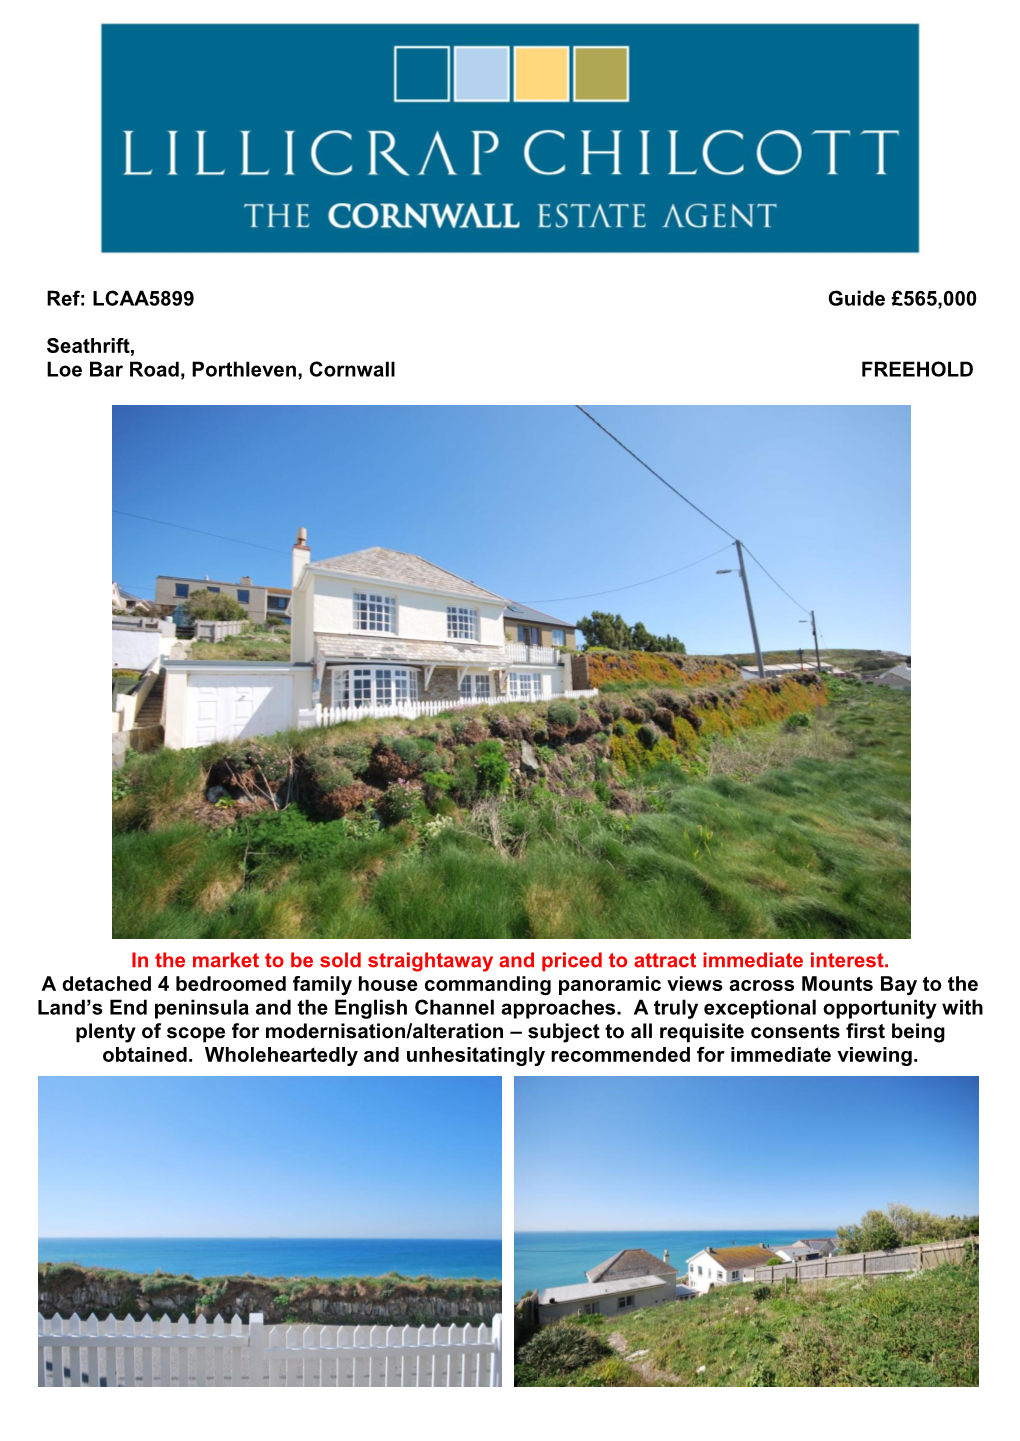 Ref: LCAA5899 Guide £565000 Seathrift, Loe Bar Road, Porthleven, Cornwall FREEHOLD